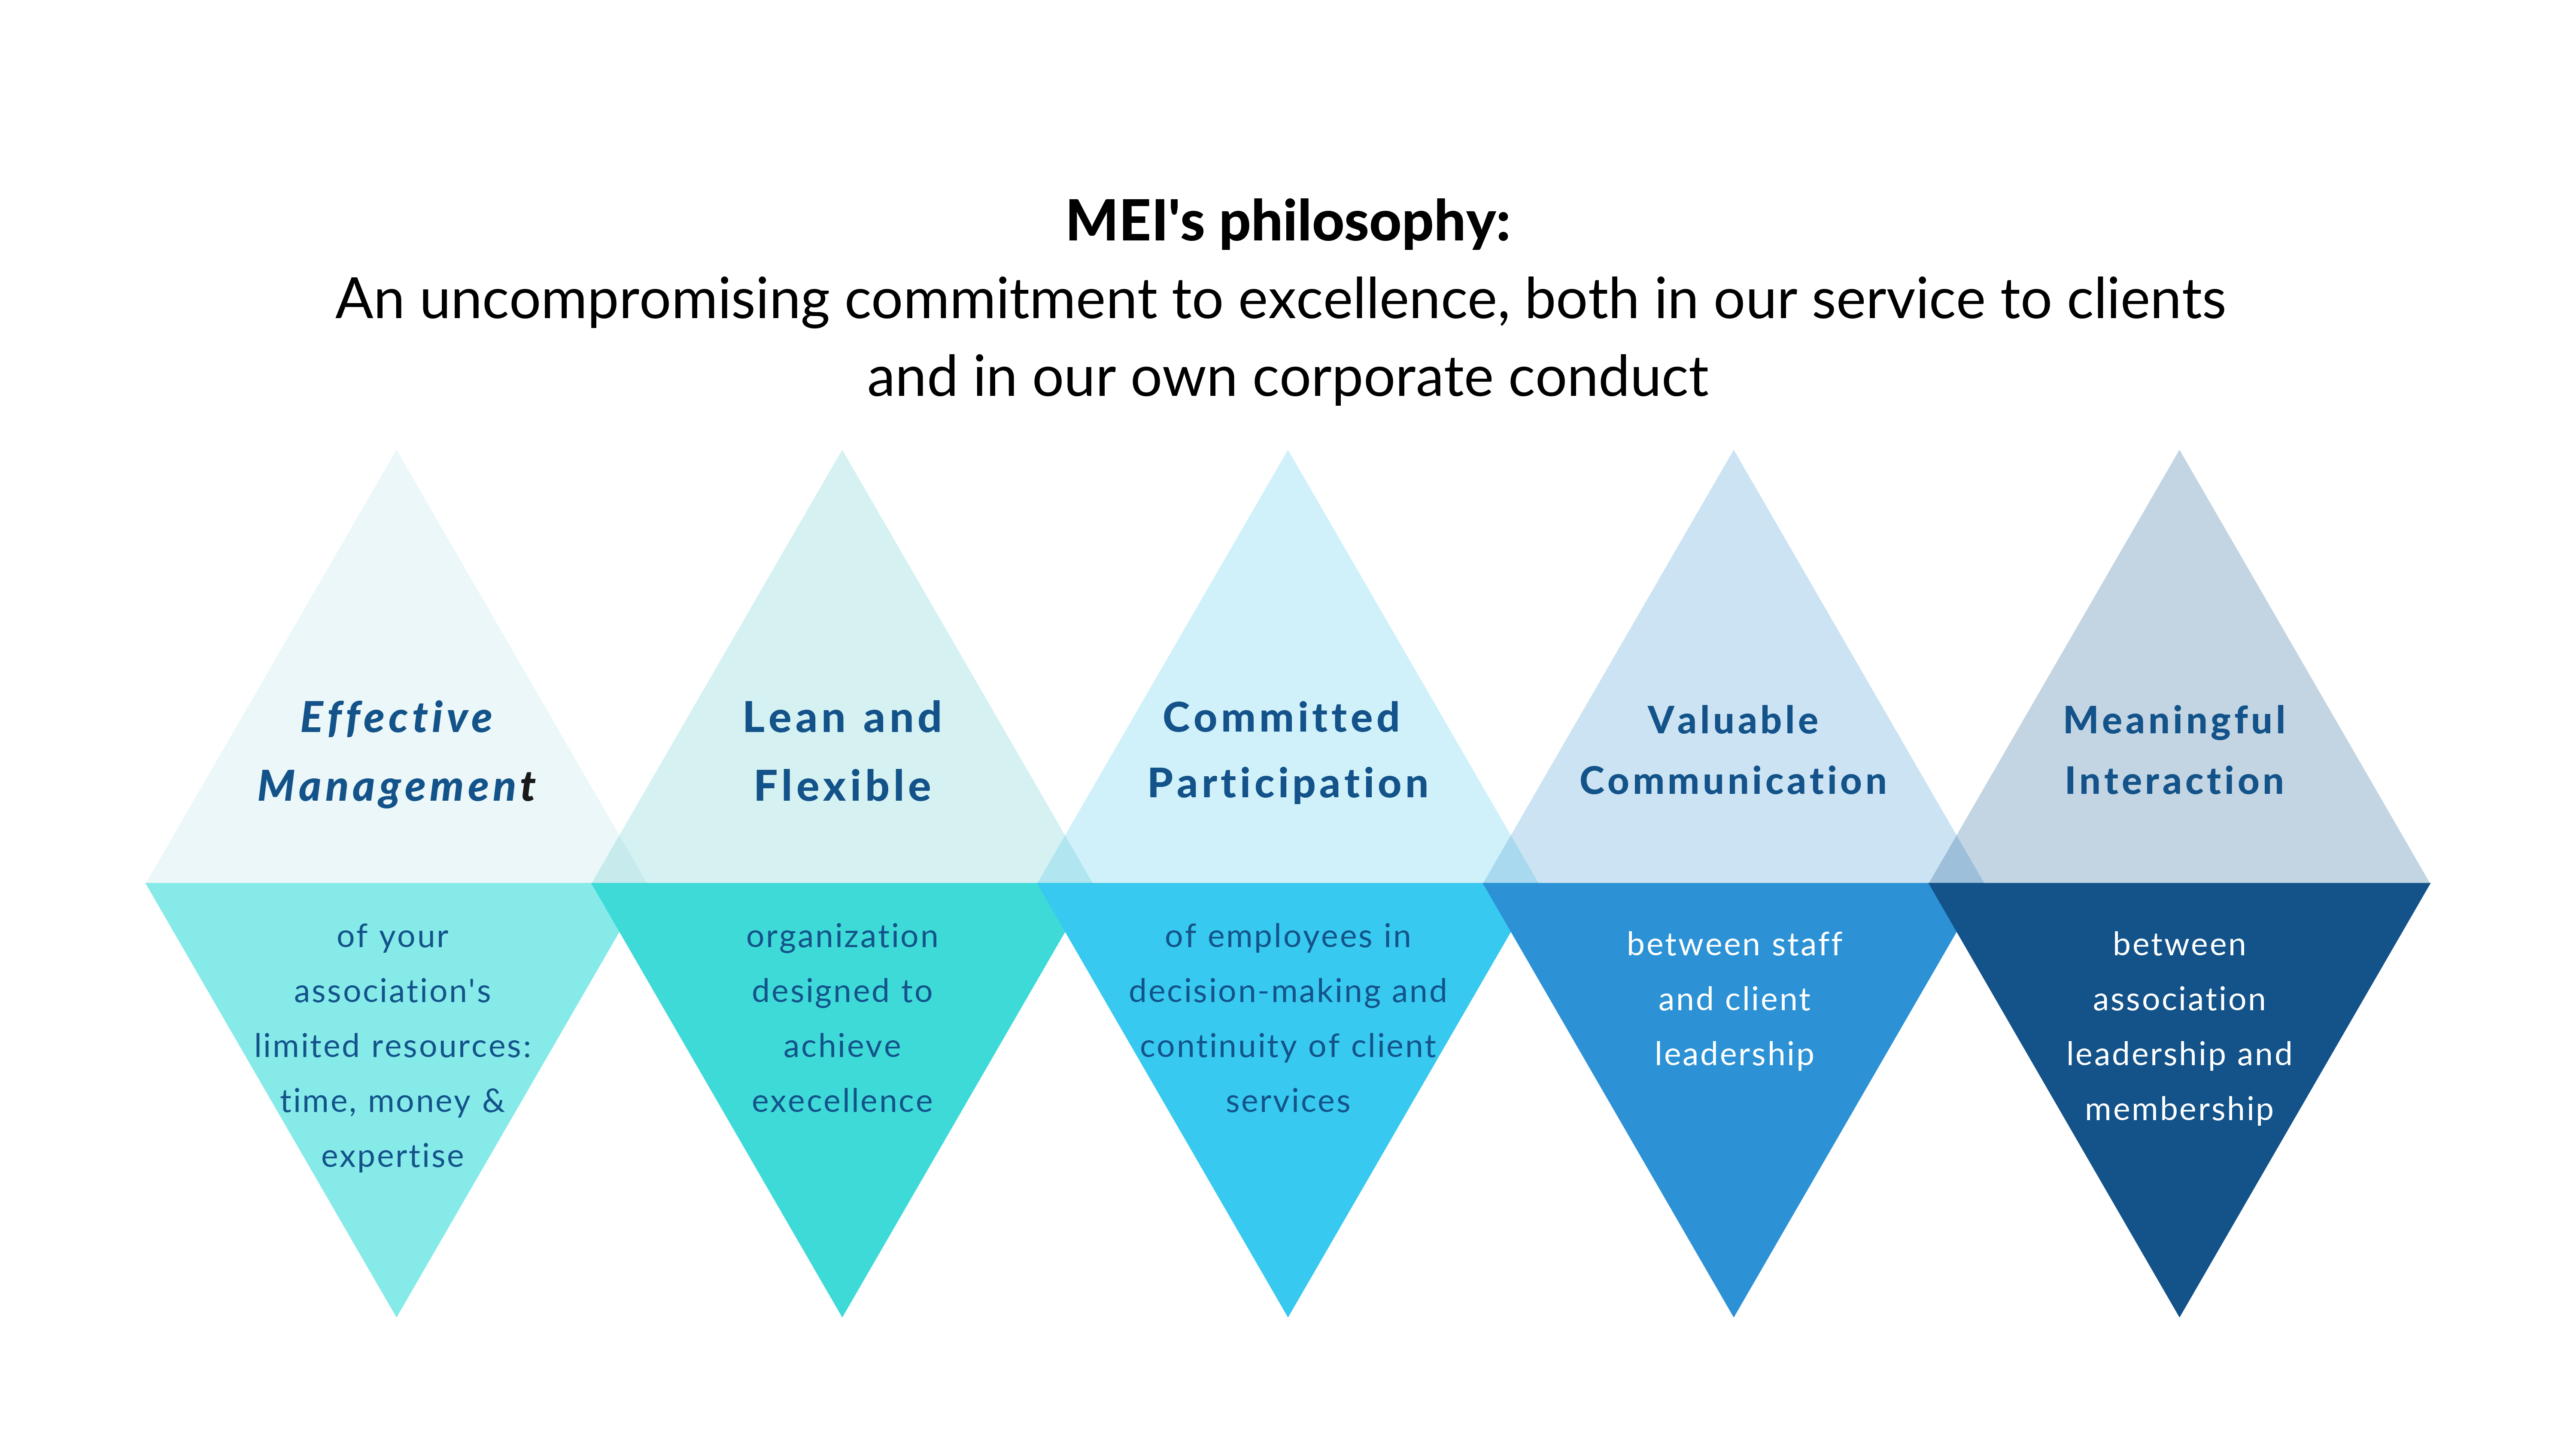 MEI philosophy is a commitment to excellence